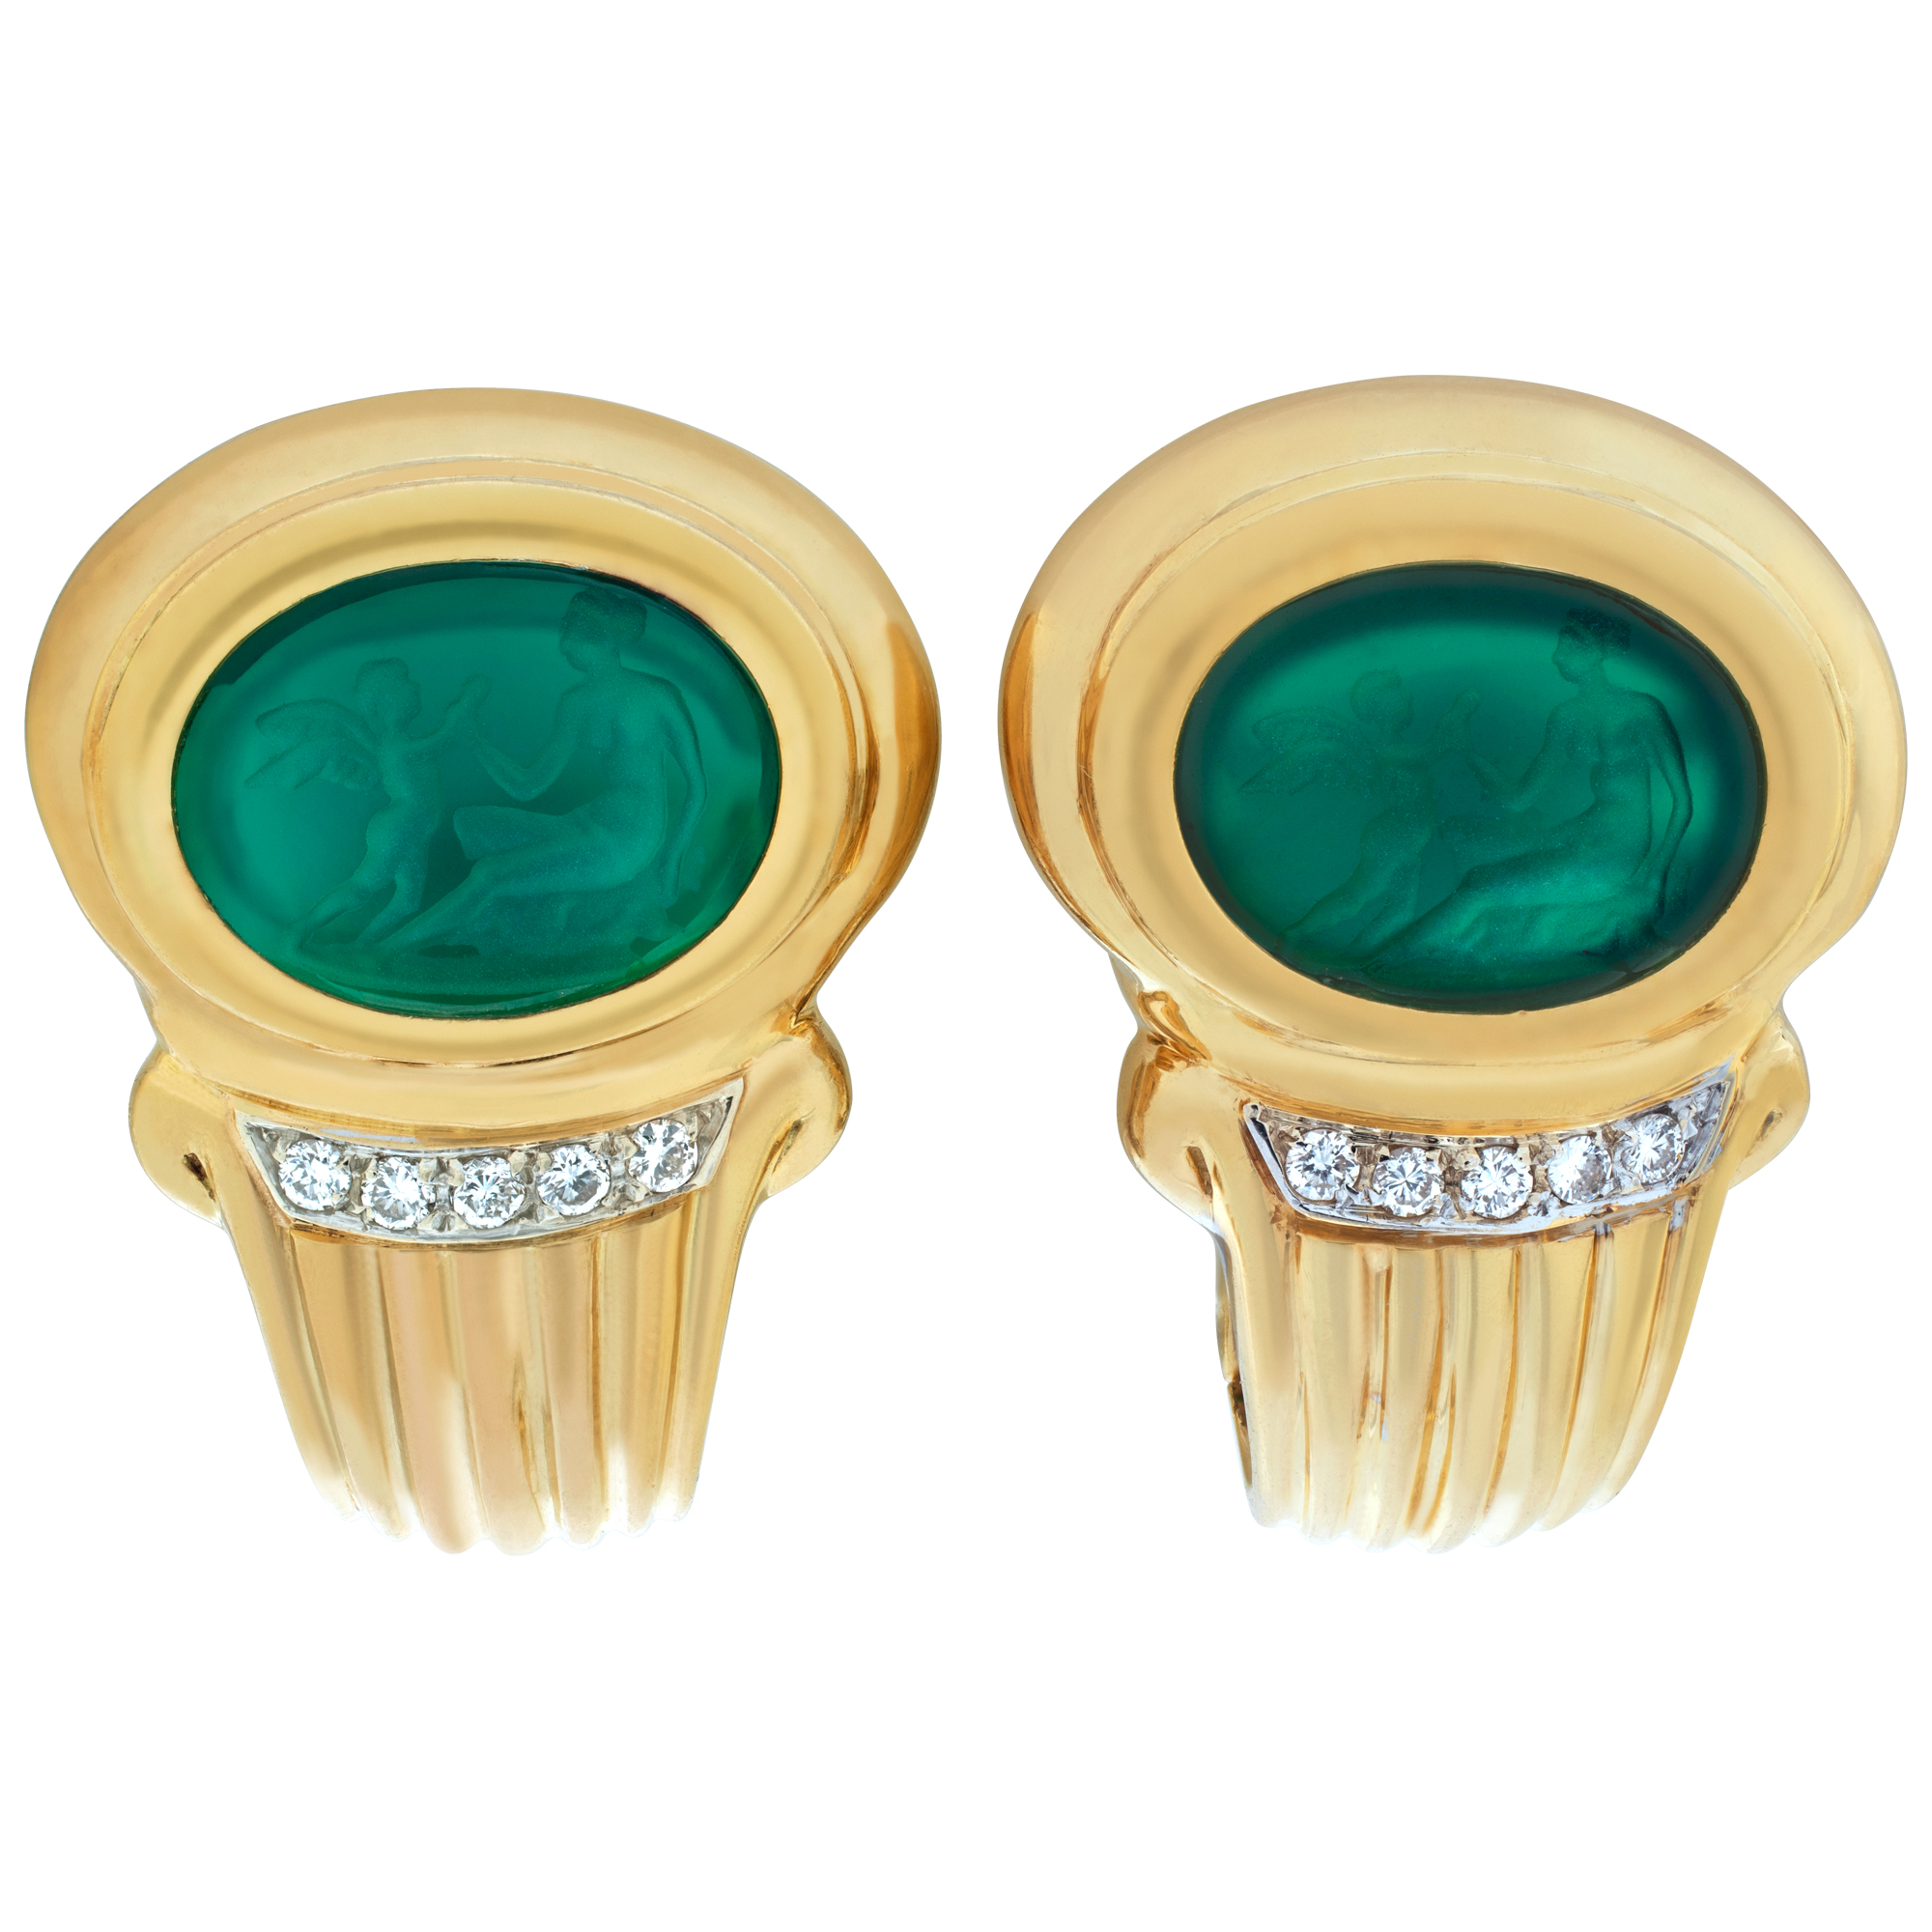 Hand carved green stones Intaglio earrings, set in 18k yellow gold with diamonds